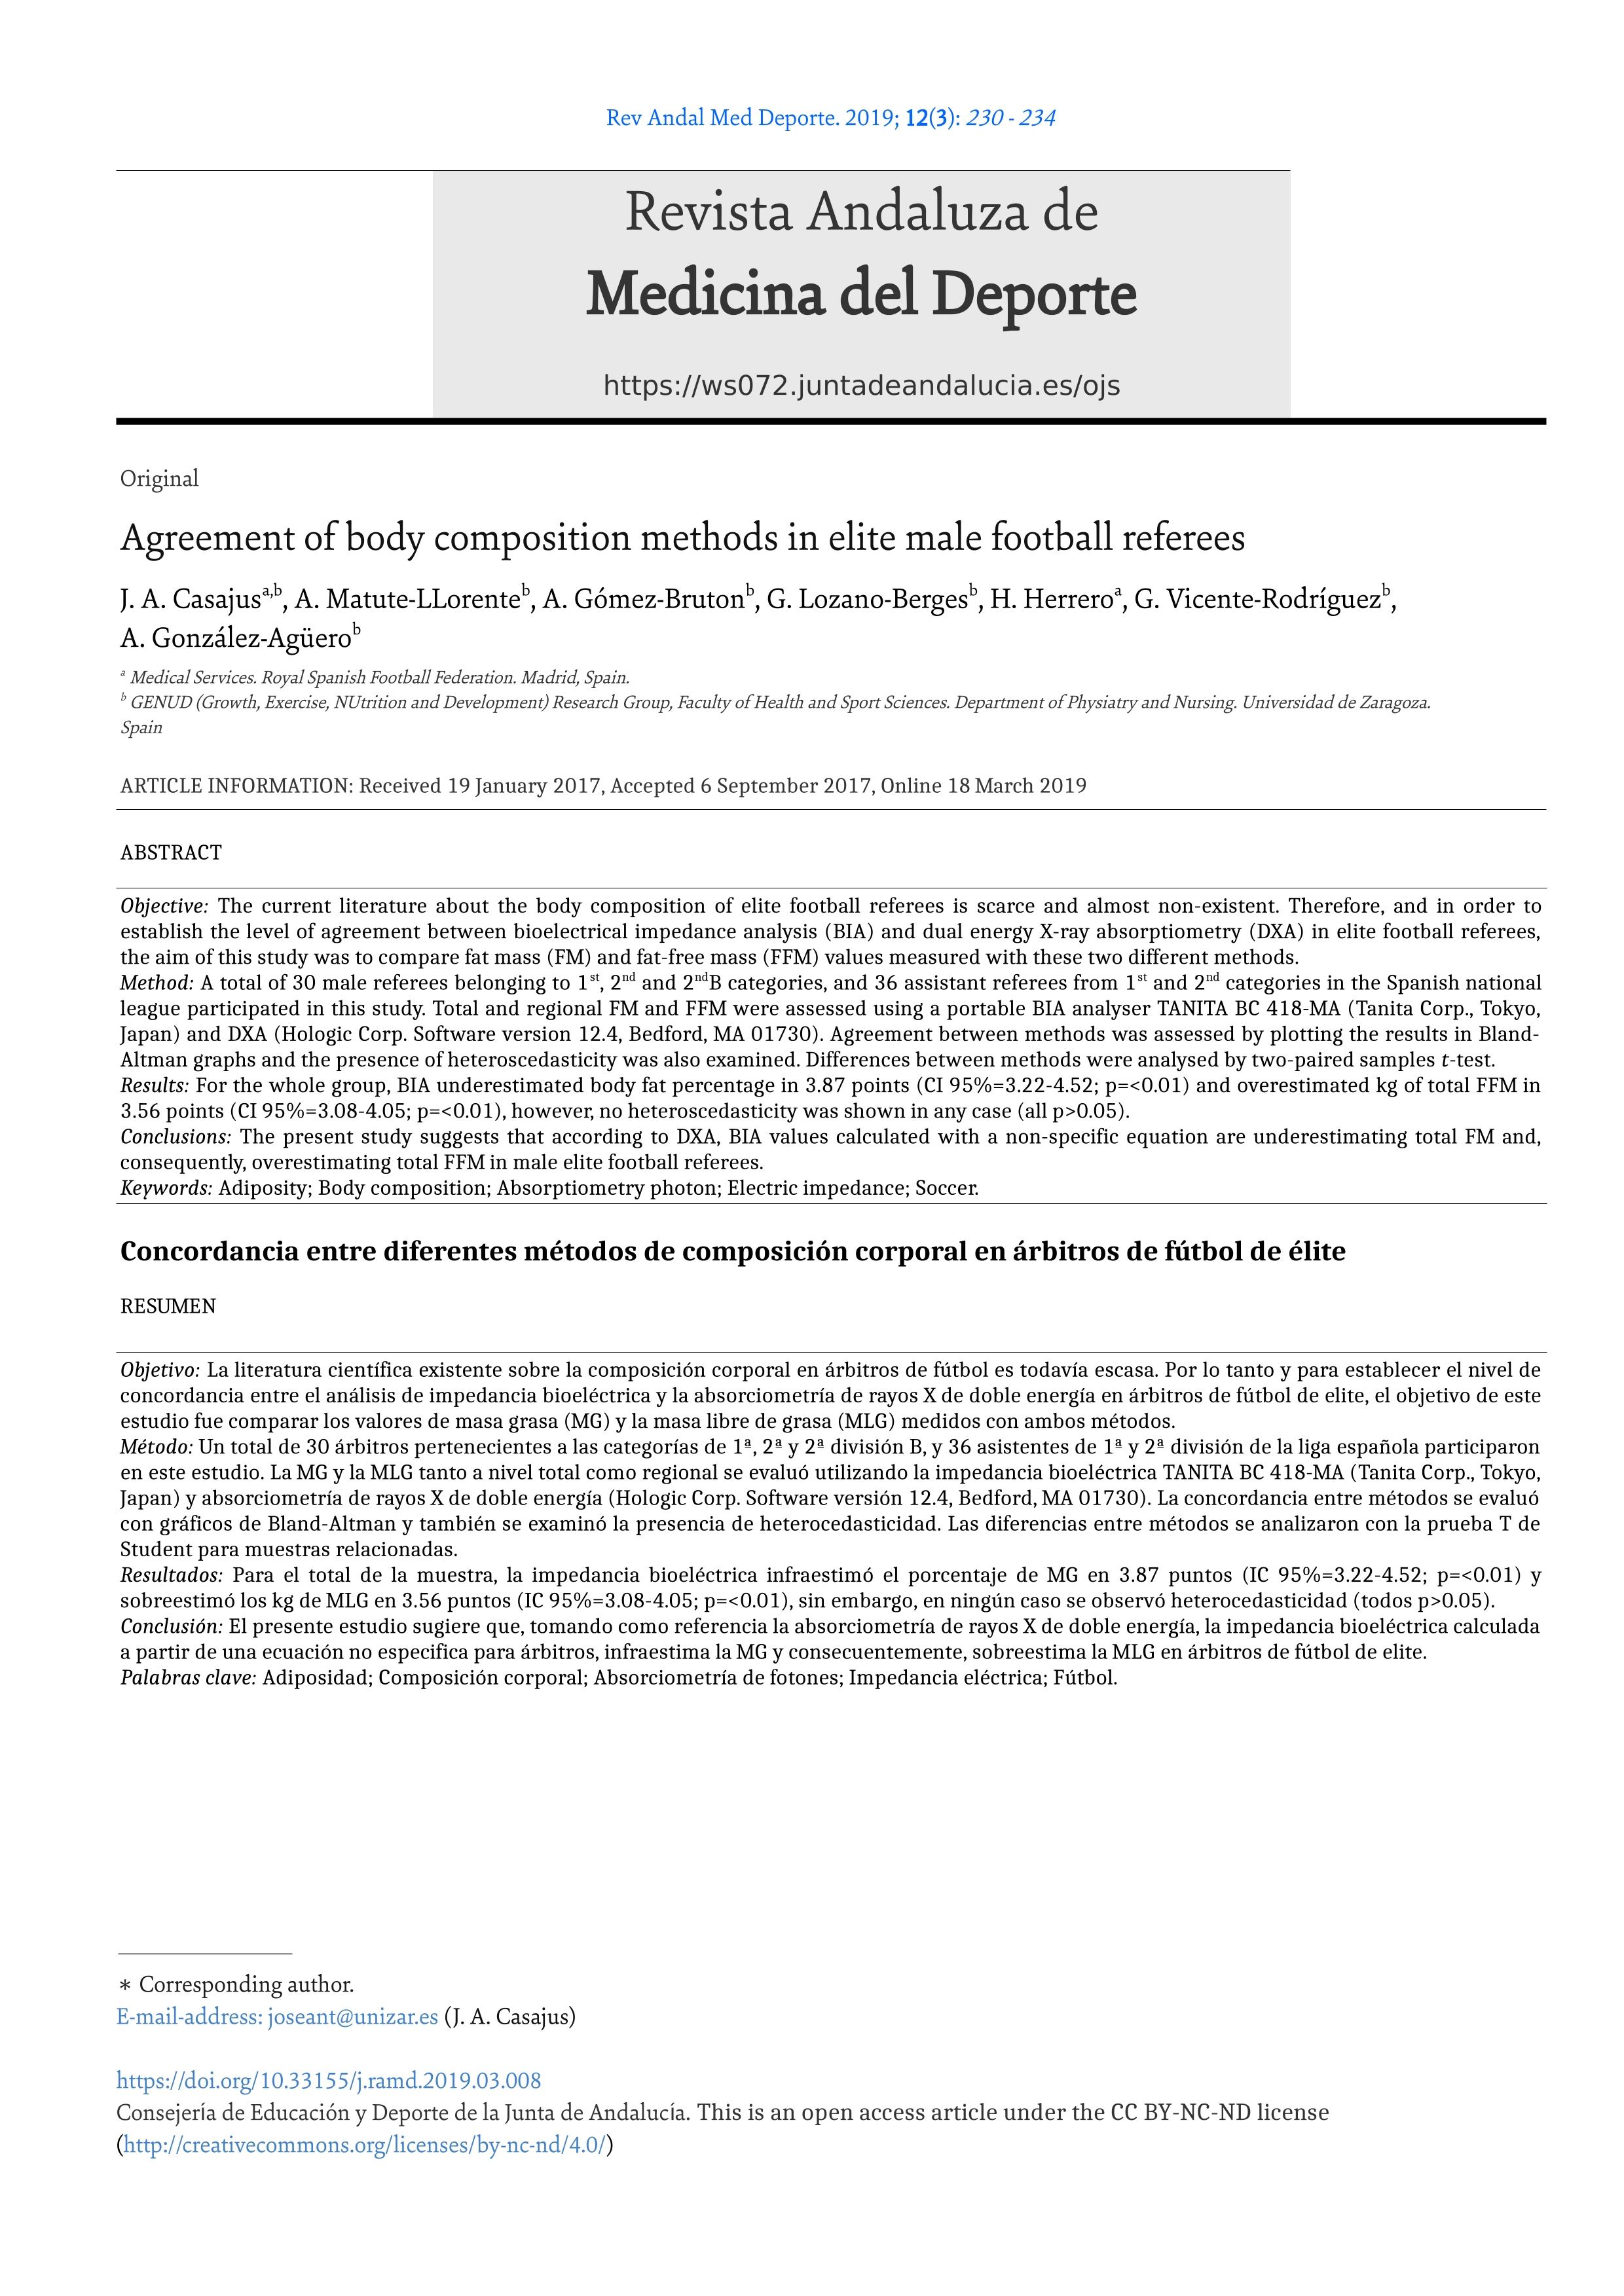 Agreement of body composition methods in elite male football referees